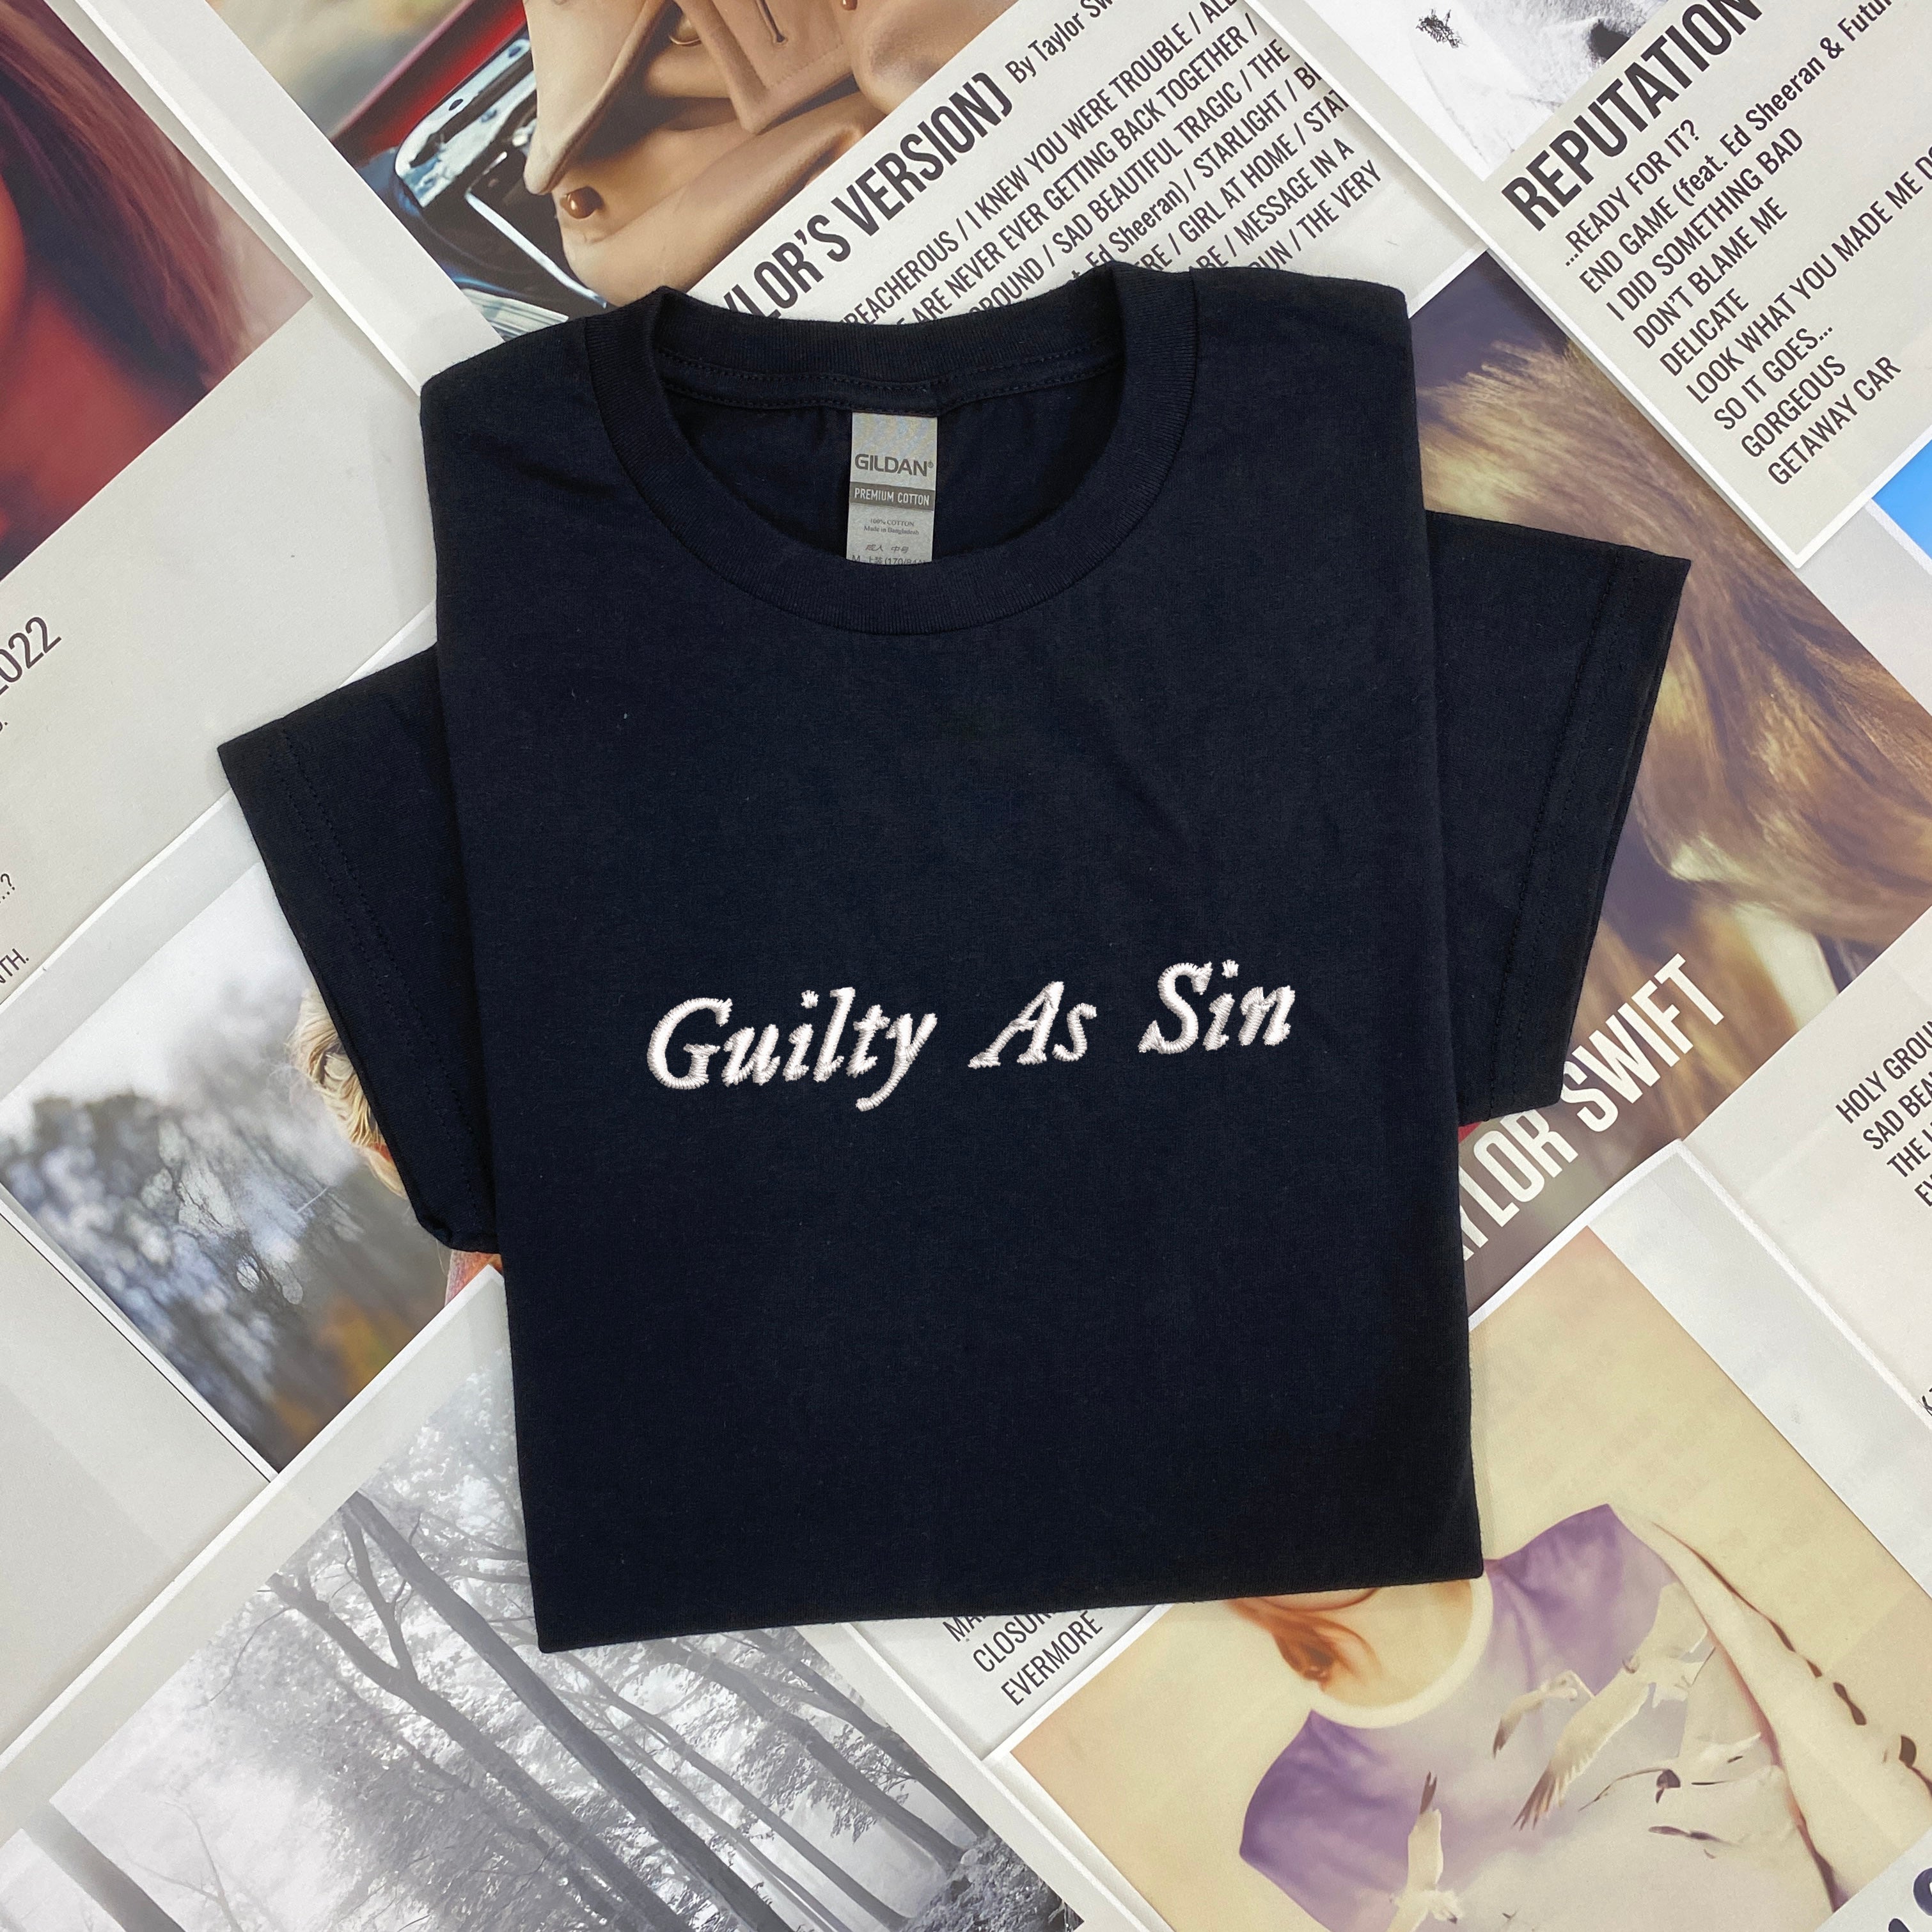 guilty as sin embroidered shirt 1714186944974.jpg